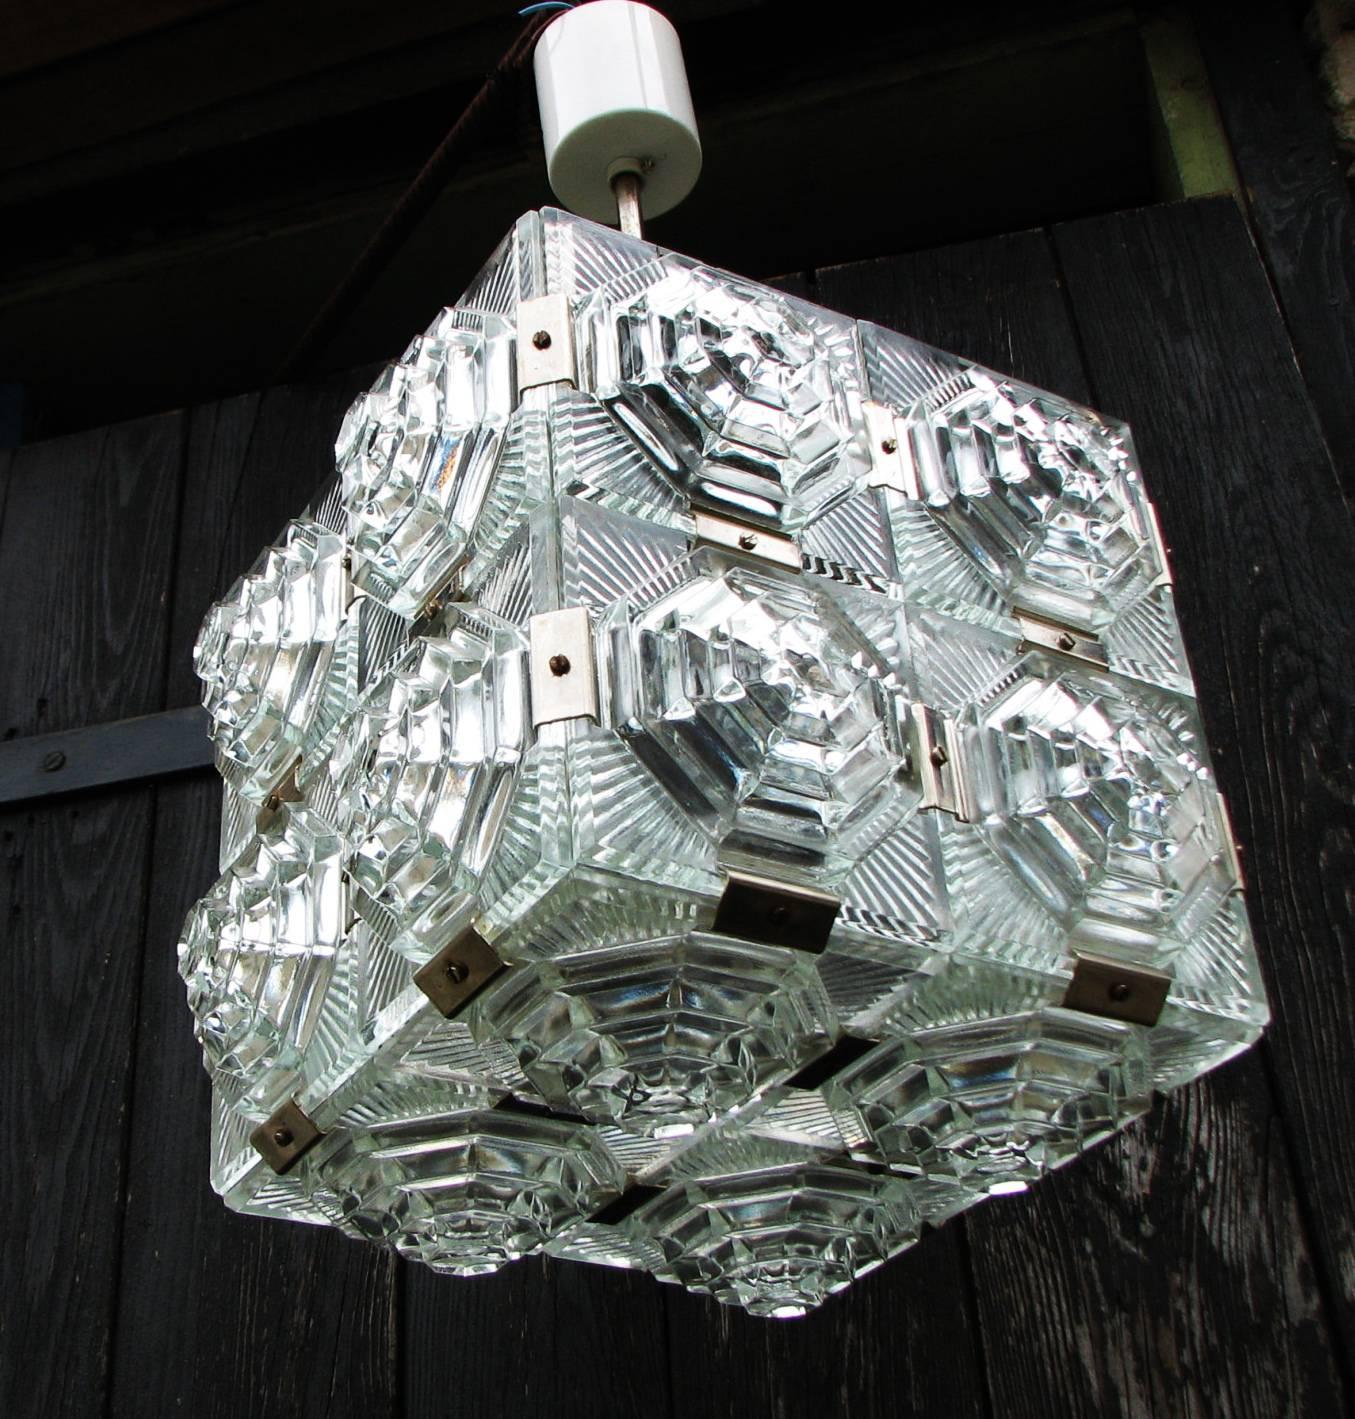 Midcentury cube form pendant ceiling fixture fitted with one E27 socket up to 100W. Made in the late 1960s by Kamenicky Senov in former Czechoslovakia.
Up to 25 pieces available.